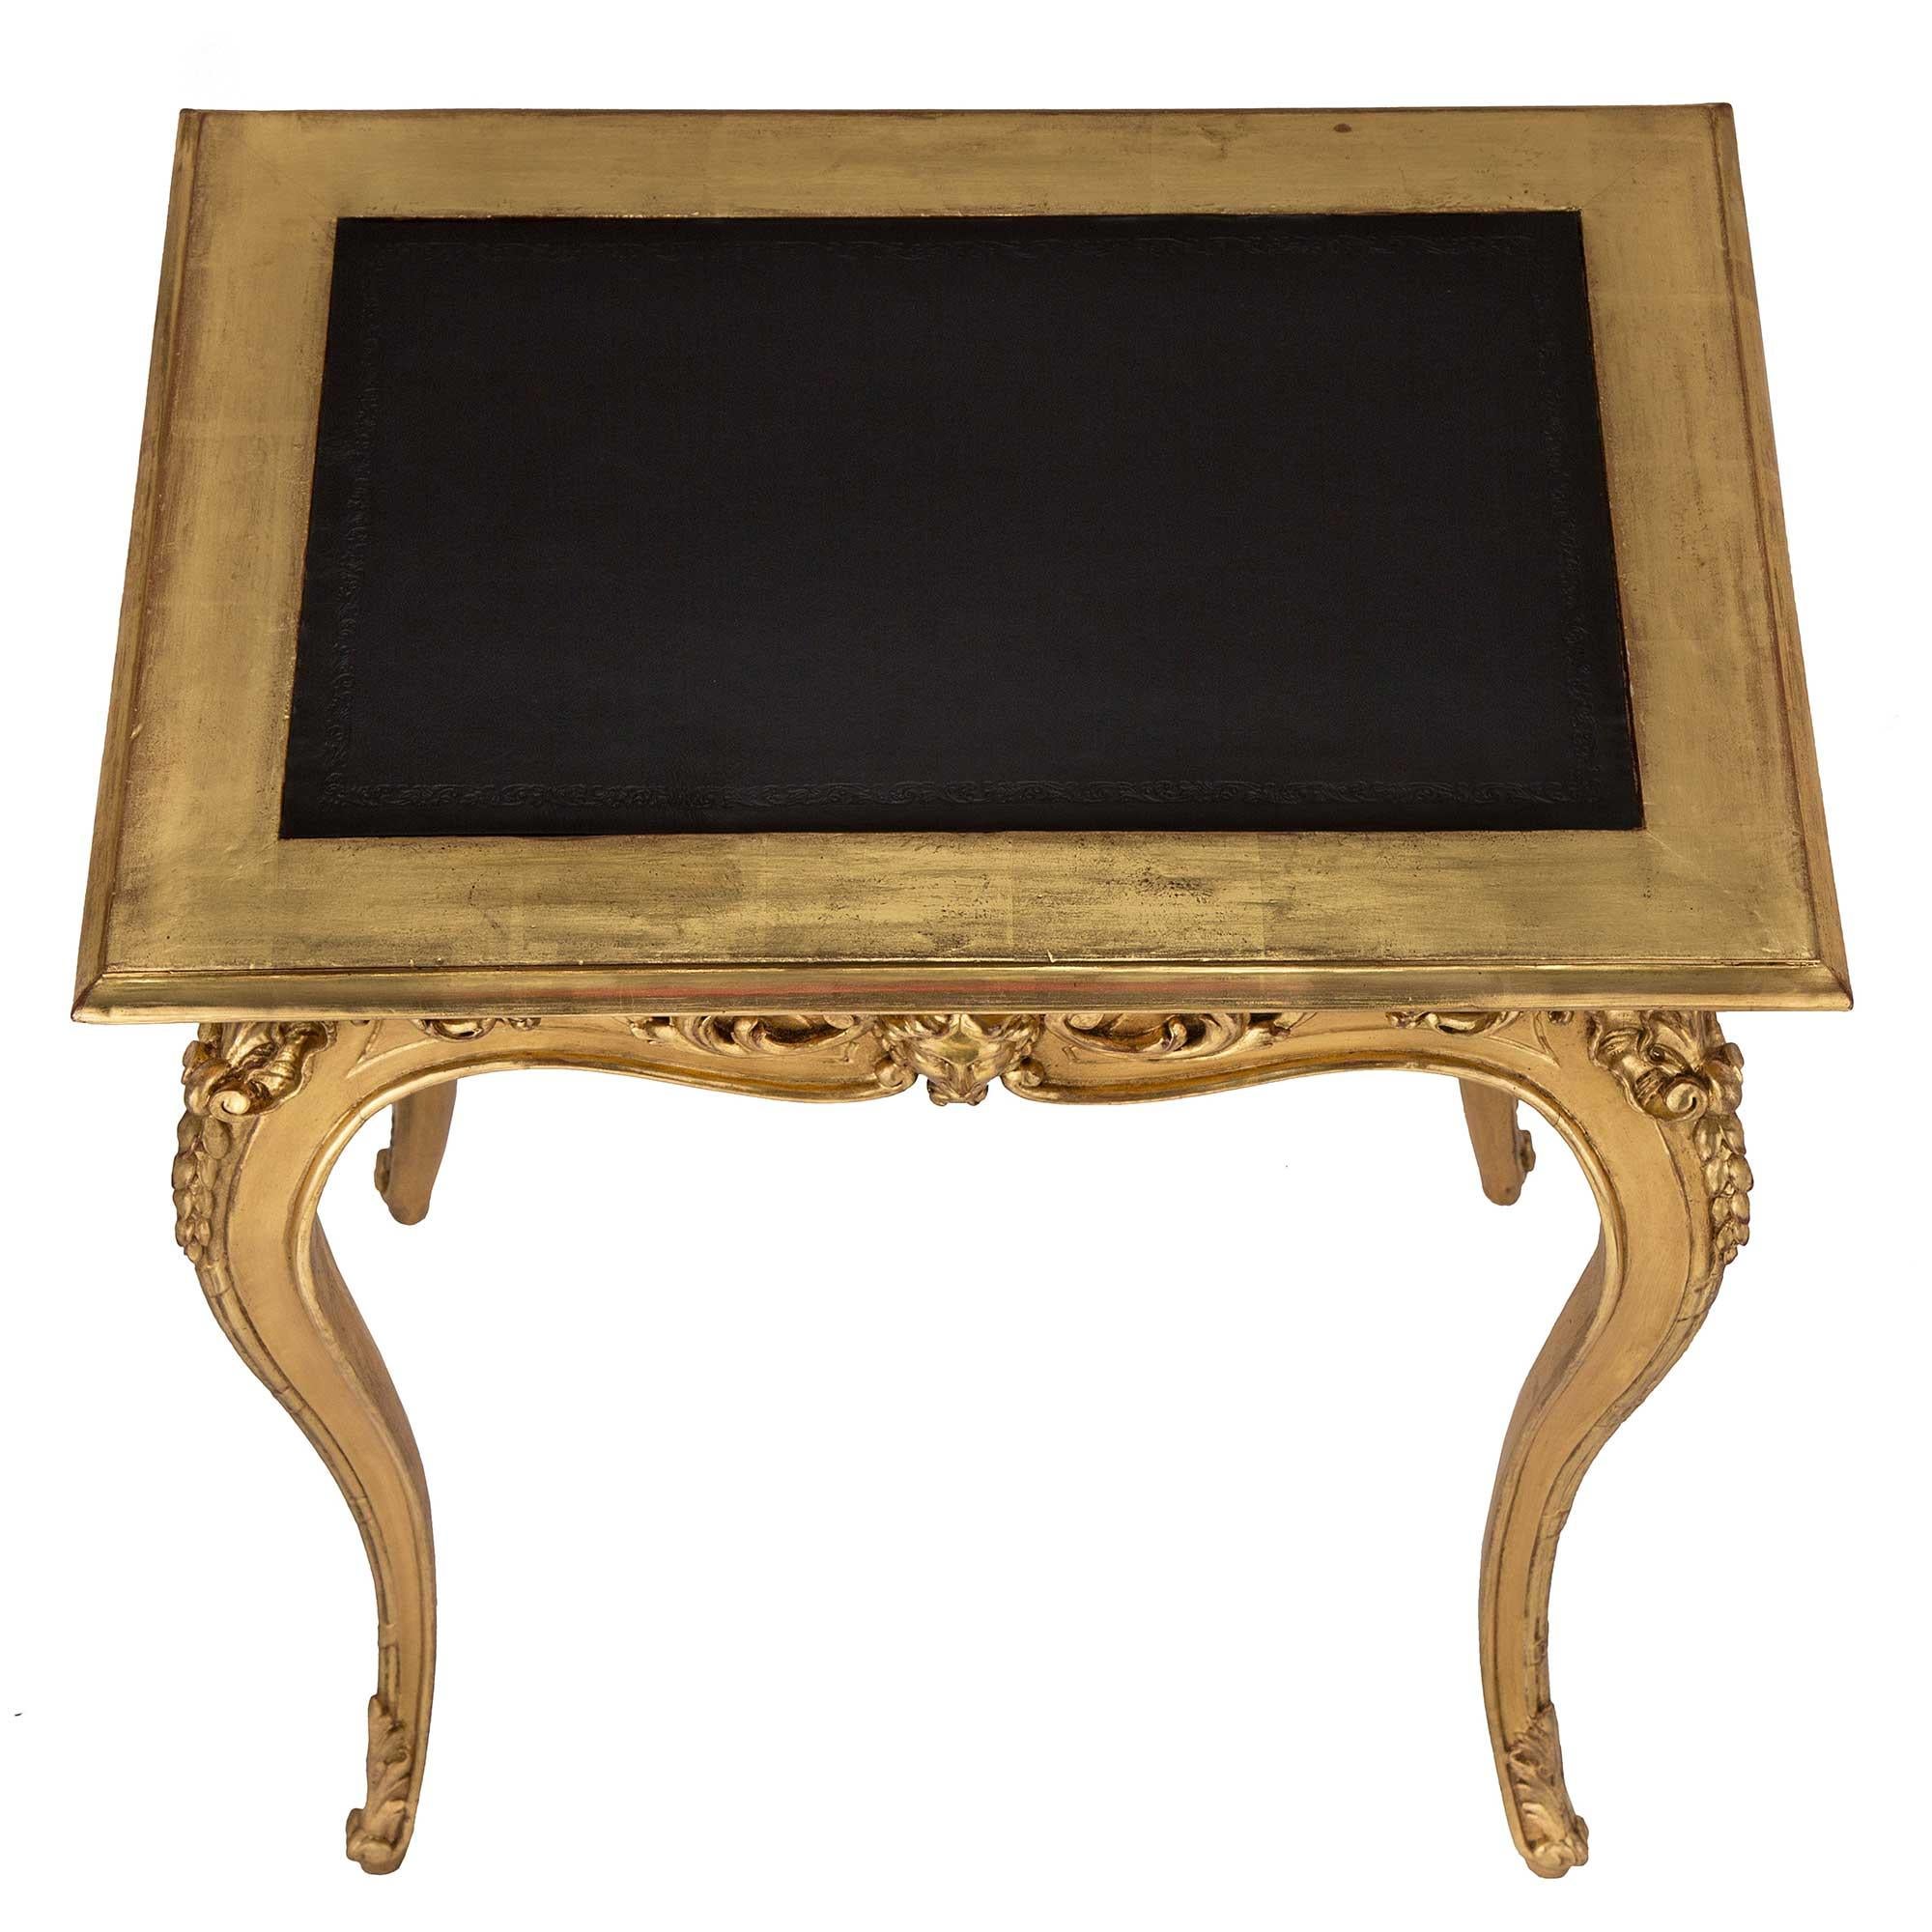 A beautiful and most elegant French 19th century Louis XV st. Giltwood and leather side table. The table is raised by slender cabriole legs with scrolled acanthus leaf feet. The arbalest shaped apron is centered by a richly carved mask of a